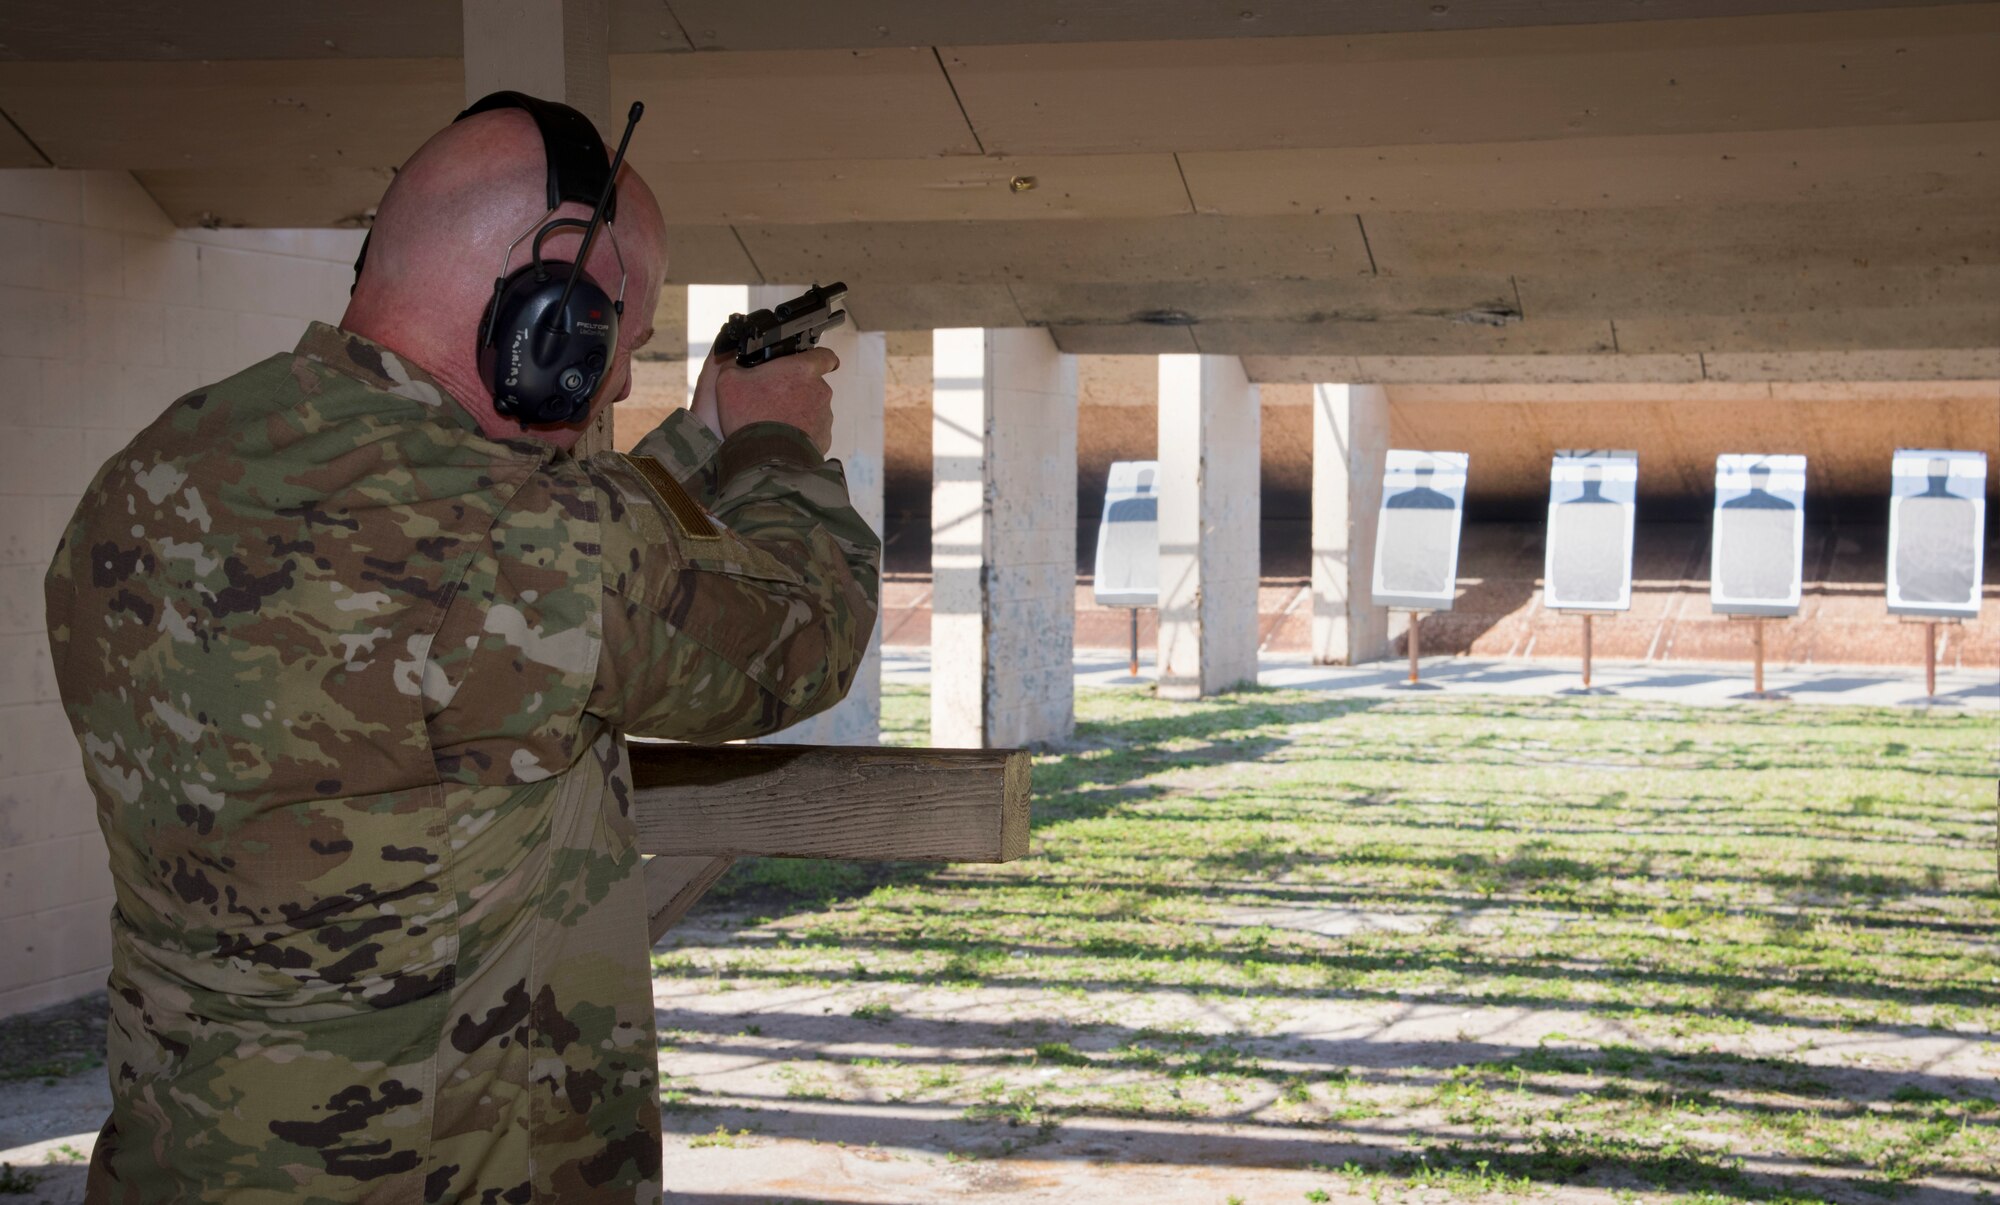 U.S. Air Force Maj. Gen. Sam Barrett, the 18th Air Force commander from Scott Air Force Base, Ill., participates in an M-9 pistol shooting competition, at MacDill AFB, Fla., May 9, 2019.